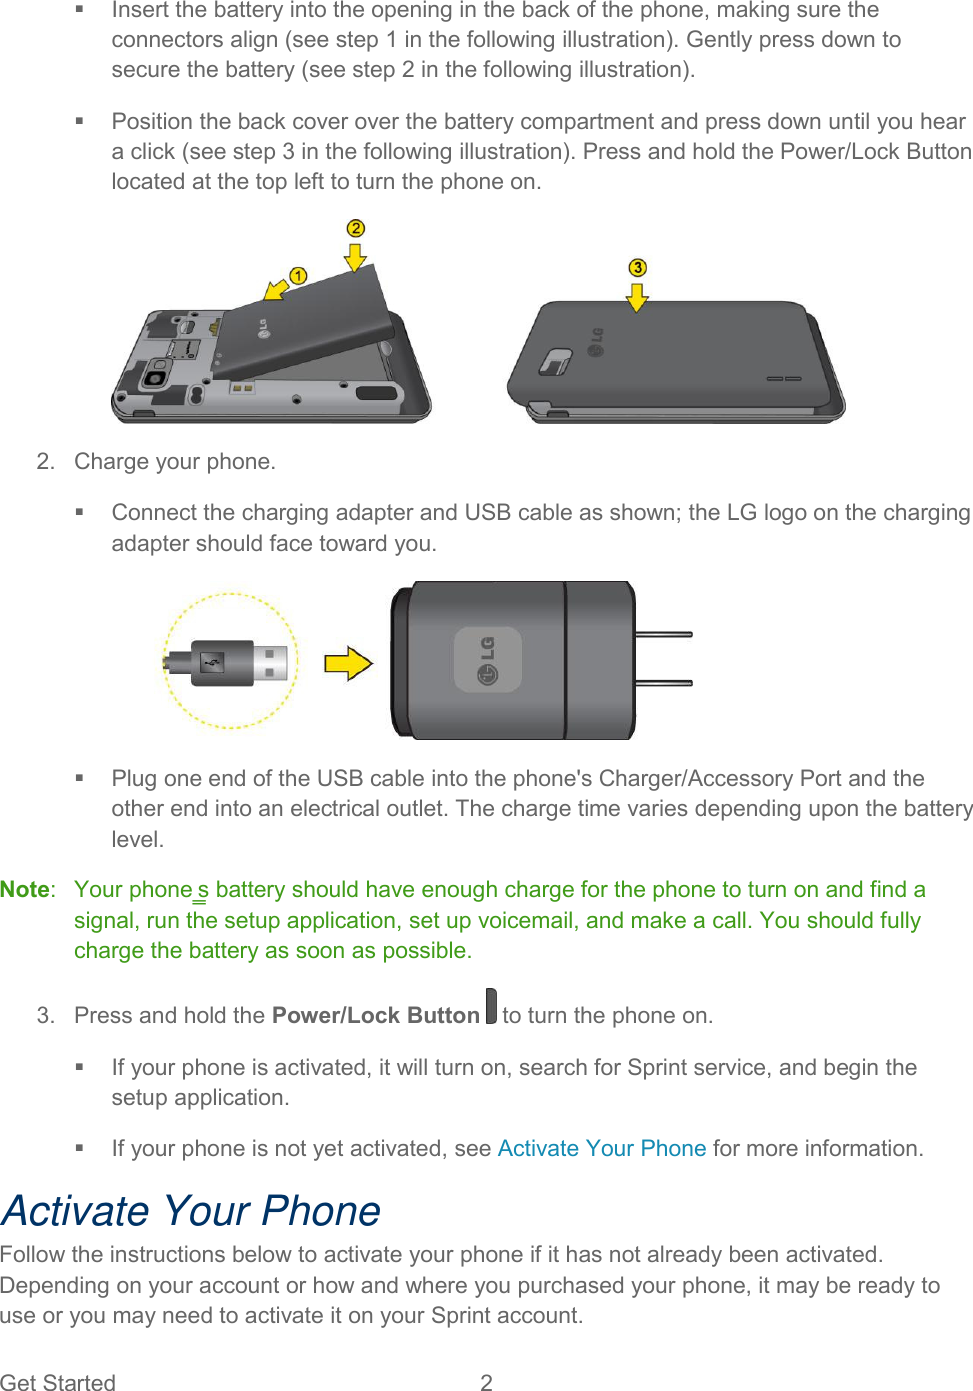  Get Started  2     Insert the battery into the opening in the back of the phone, making sure the connectors align (see step 1 in the following illustration). Gently press down to secure the battery (see step 2 in the following illustration).    Position the back cover over the battery compartment and press down until you hear a click (see step 3 in the following illustration). Press and hold the Power/Lock Button located at the top left to turn the phone on.   2.  Charge your phone.    Connect the charging adapter and USB cable as shown; the LG logo on the charging adapter should face toward you.     Plug one end of the USB cable into the phone&apos;s Charger/Accessory Port and the other end into an electrical outlet. The charge time varies depending upon the battery level.  Note:   Your phone‗s battery should have enough charge for the phone to turn on and find a signal, run the setup application, set up voicemail, and make a call. You should fully charge the battery as soon as possible.  3.  Press and hold the Power/Lock Button   to turn the phone on.    If your phone is activated, it will turn on, search for Sprint service, and begin the setup application.    If your phone is not yet activated, see Activate Your Phone for more information.  Activate Your Phone Follow the instructions below to activate your phone if it has not already been activated. Depending on your account or how and where you purchased your phone, it may be ready to use or you may need to activate it on your Sprint account. 